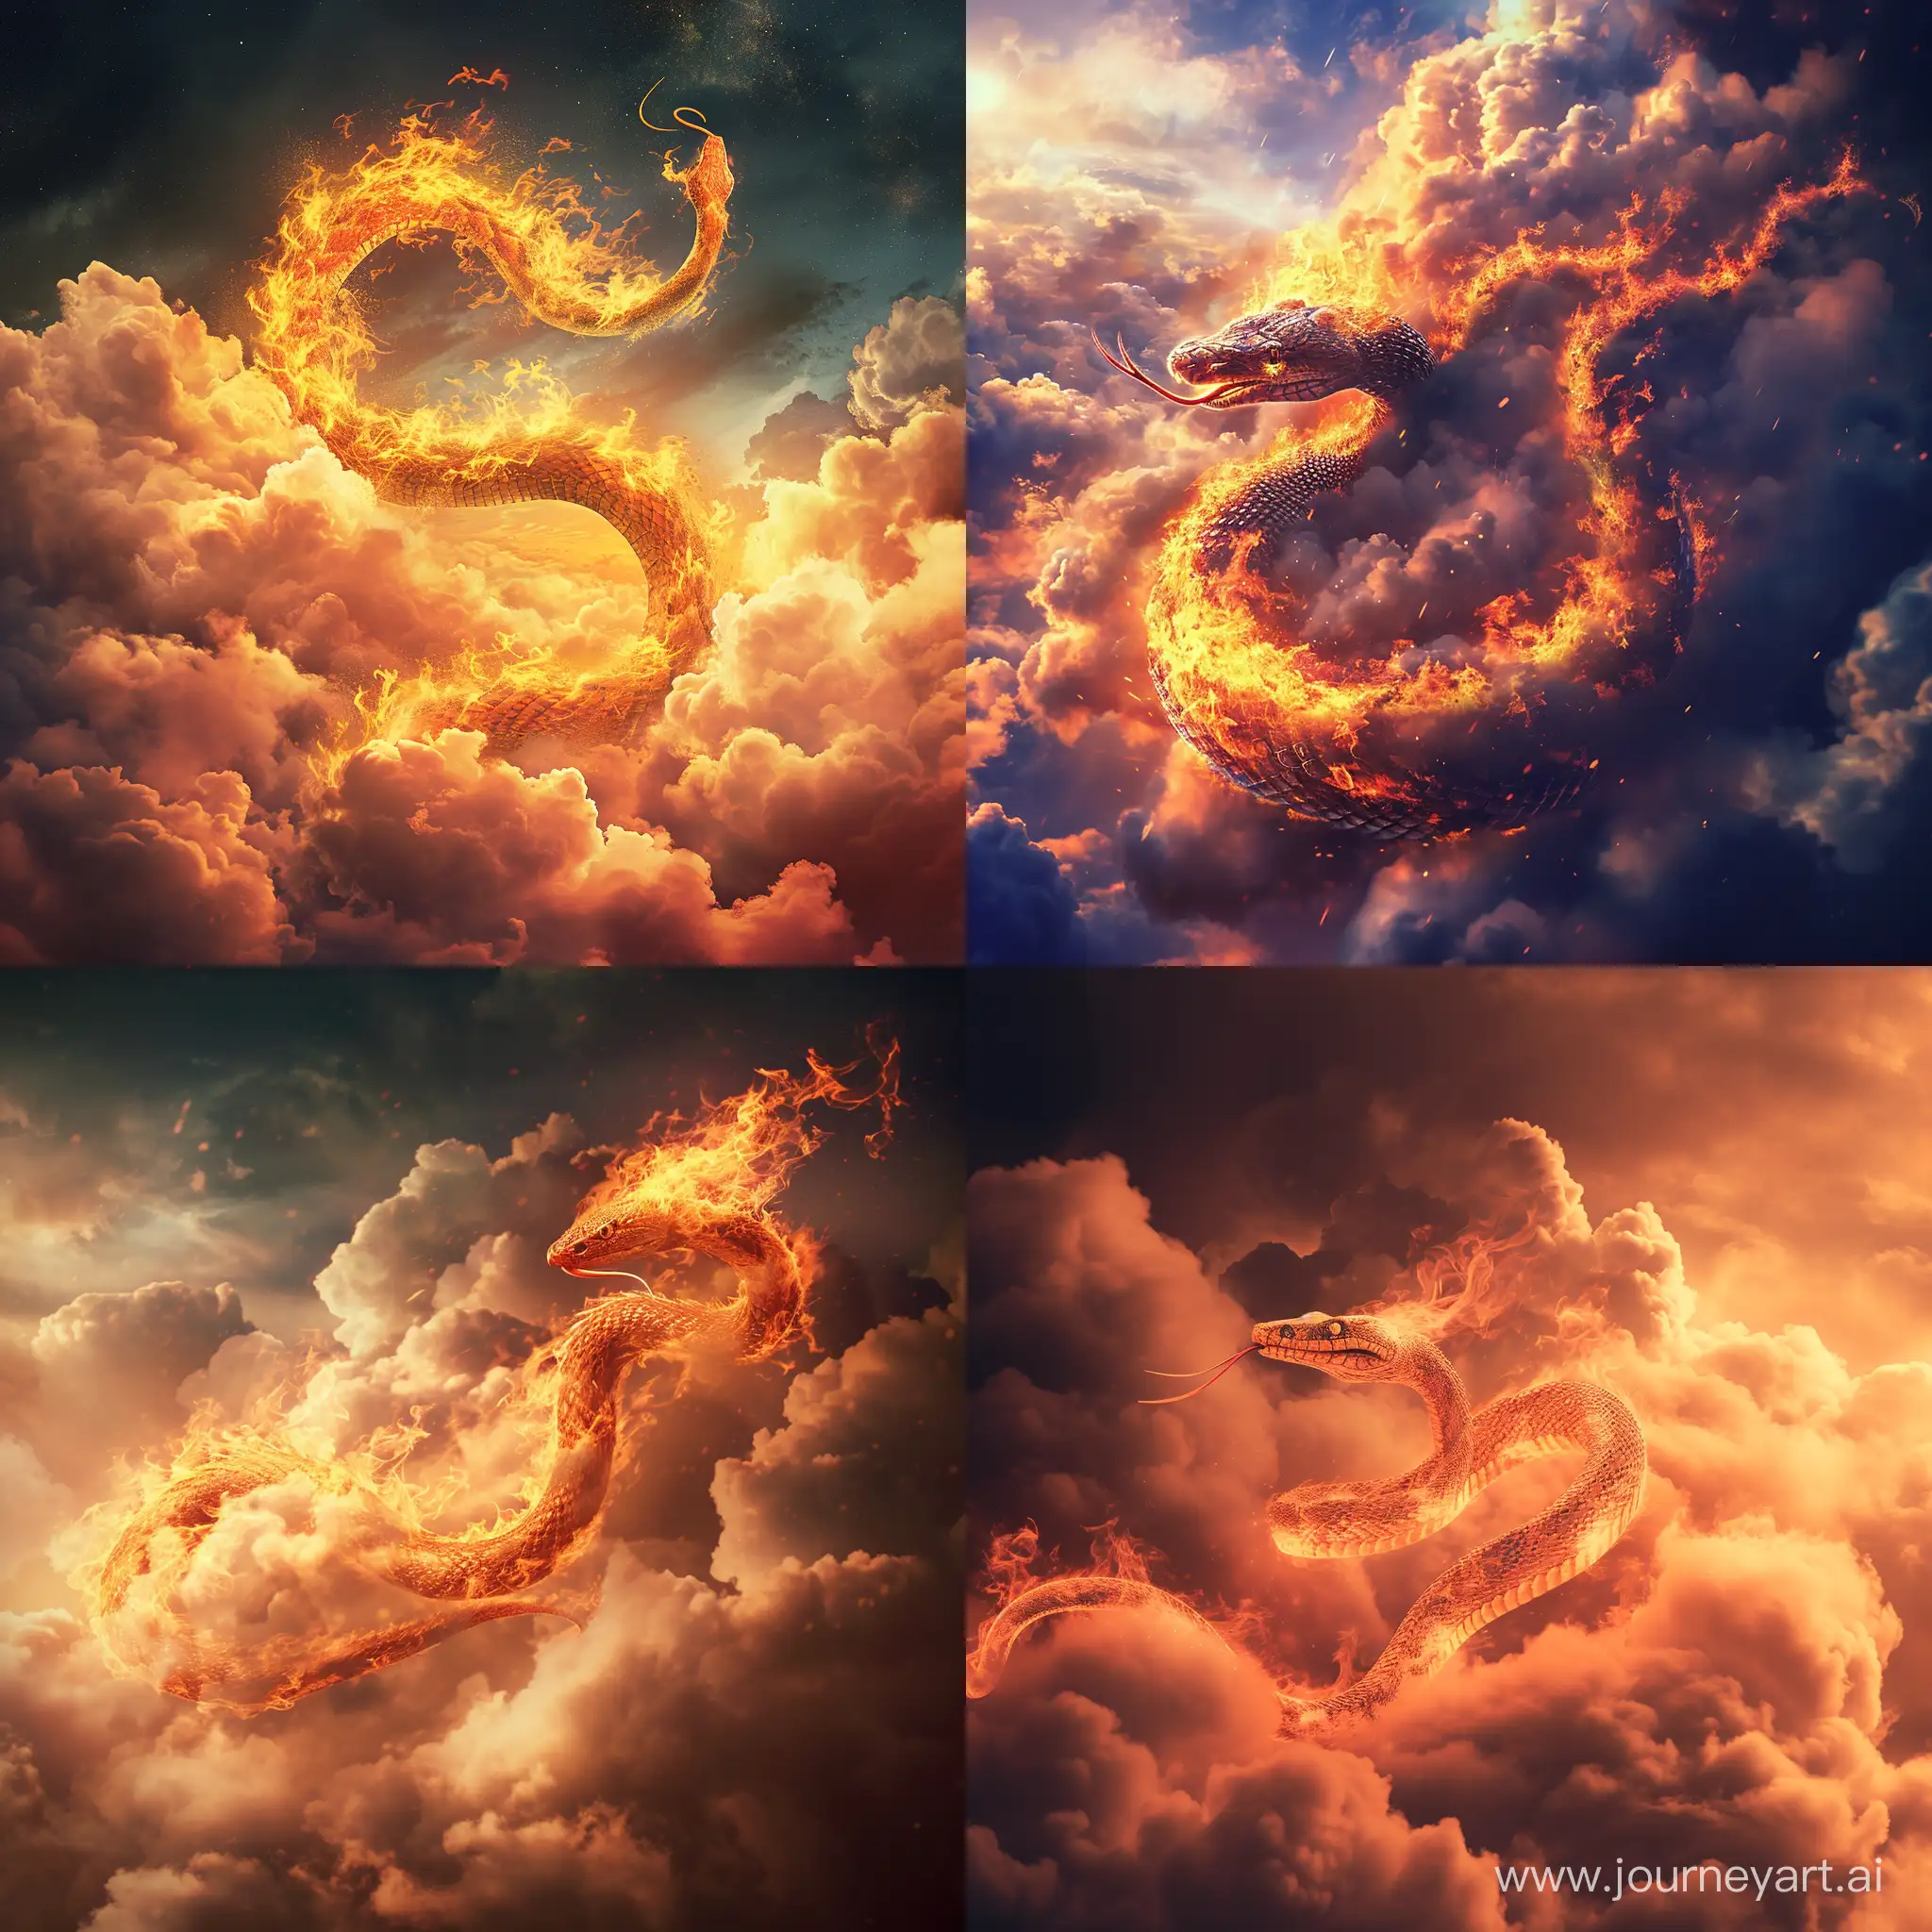 Majestic-Fire-Serpent-Soaring-Through-the-Clouds